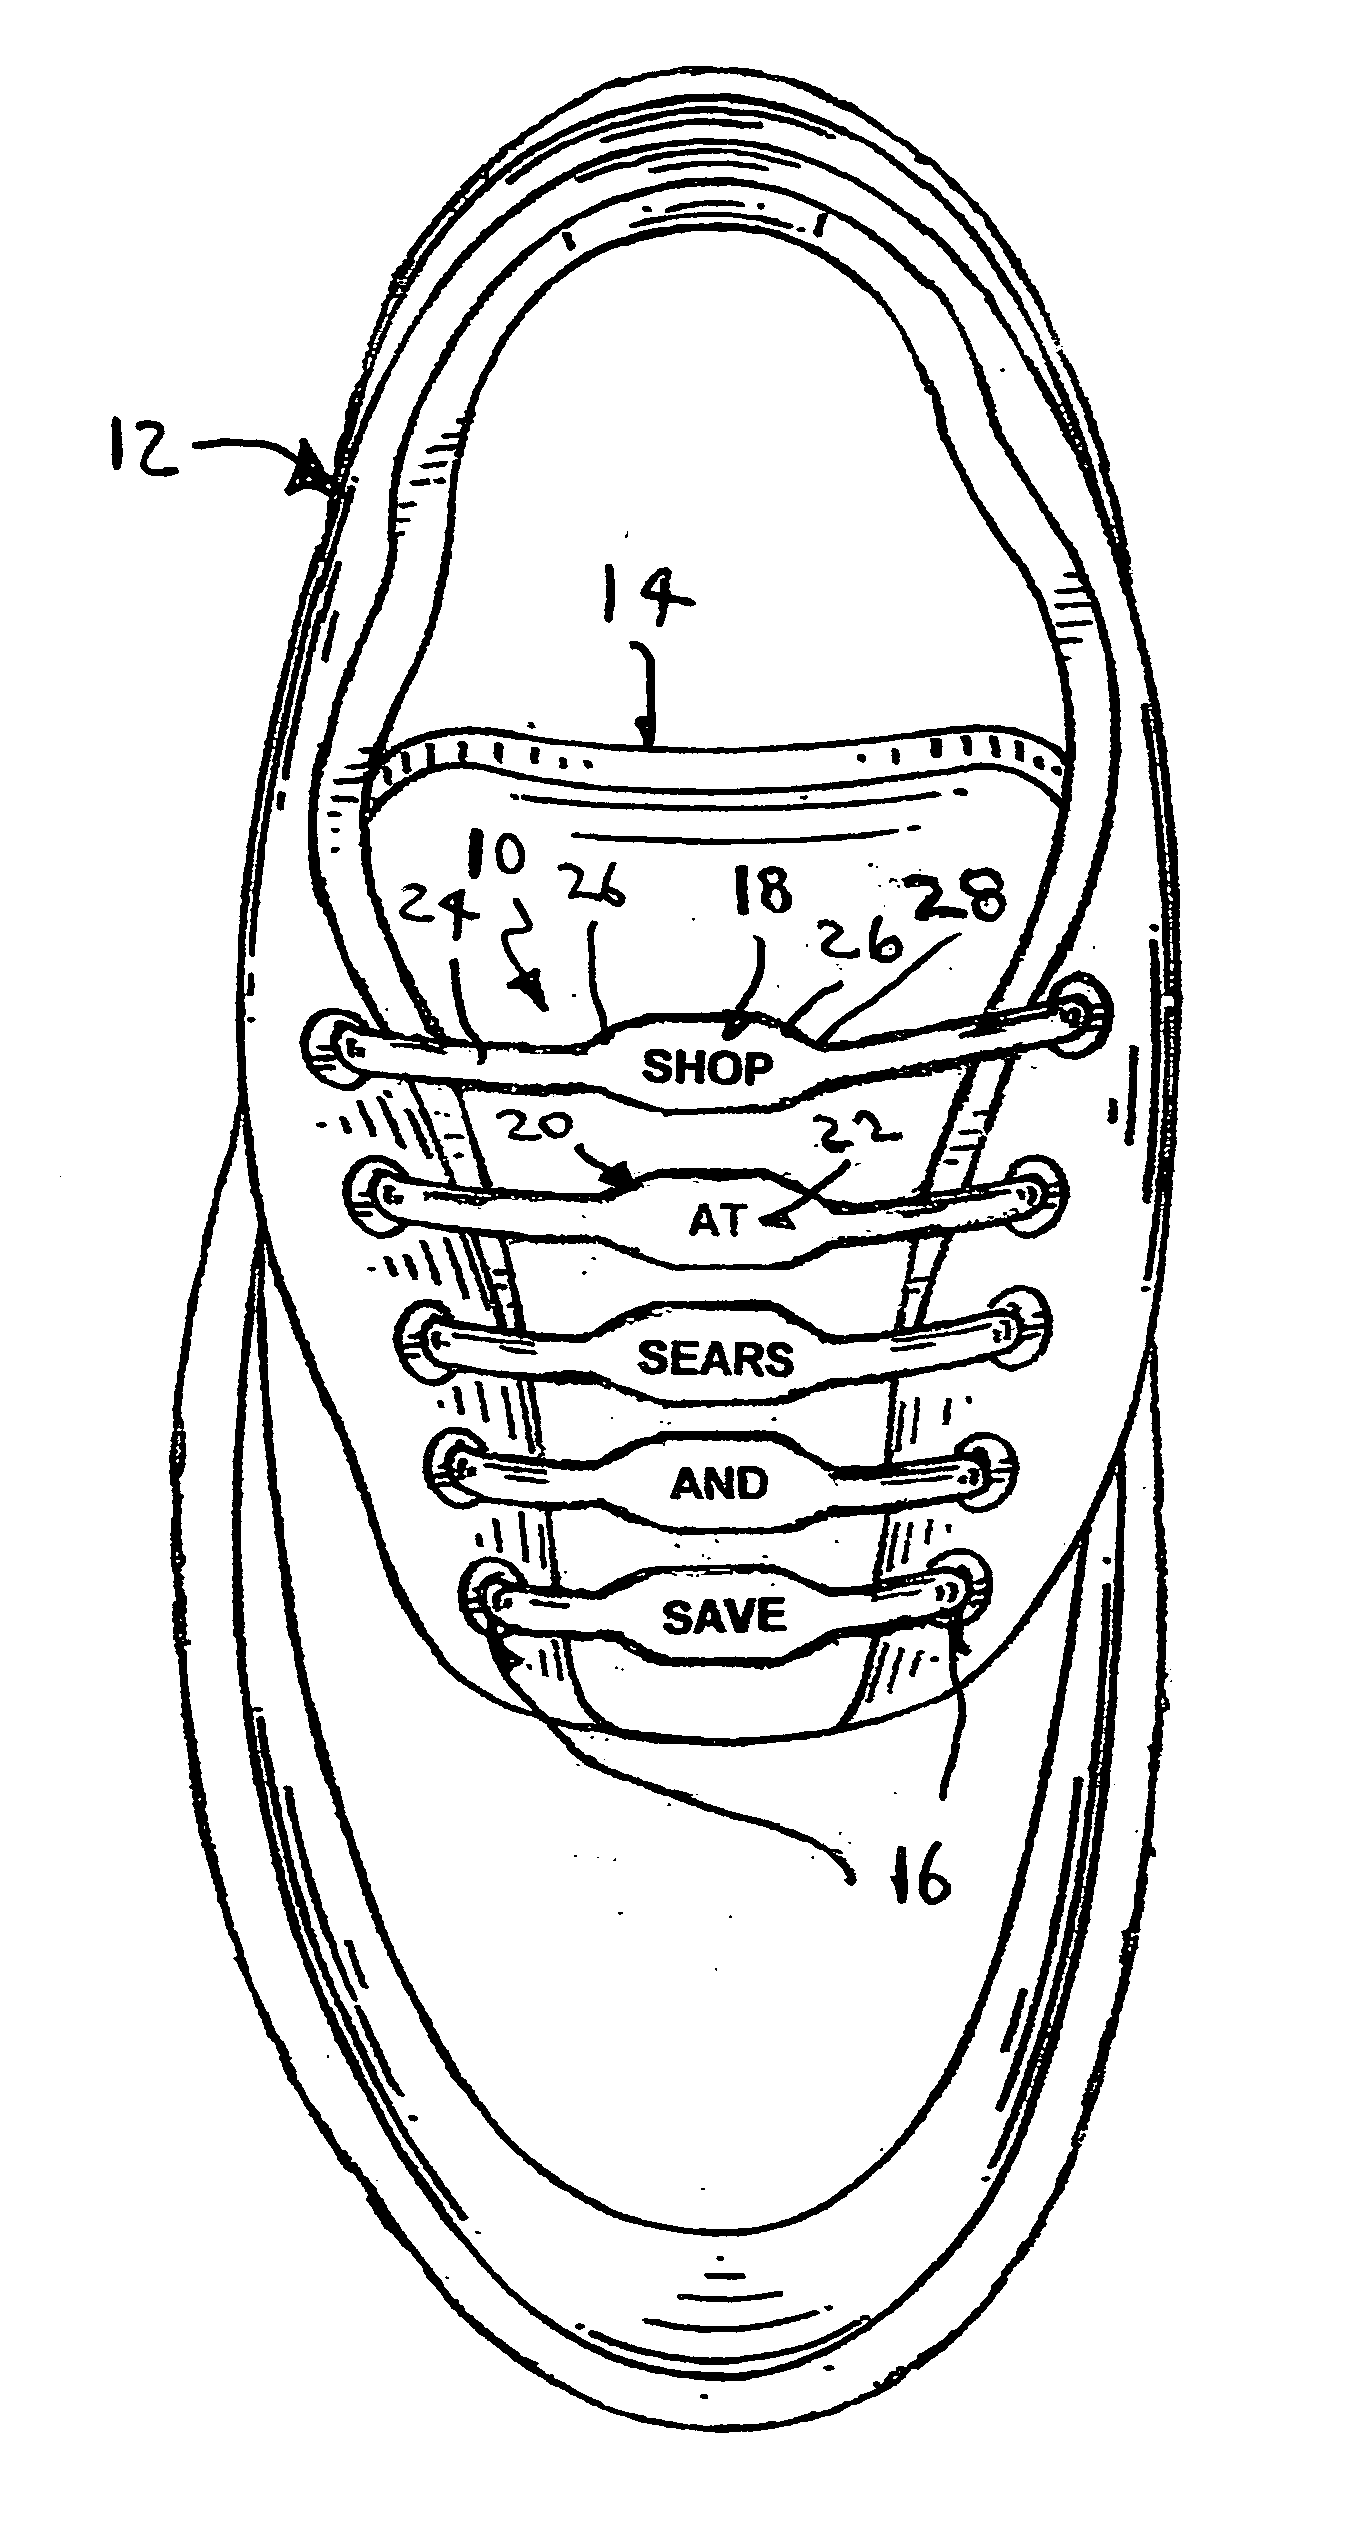 Lace for a shoe having a tongue and horizontal pairs of shoelace holes and for displaying a message over the tongue of the shoe and between the horizontal pairs of shoelace holes of the shoe